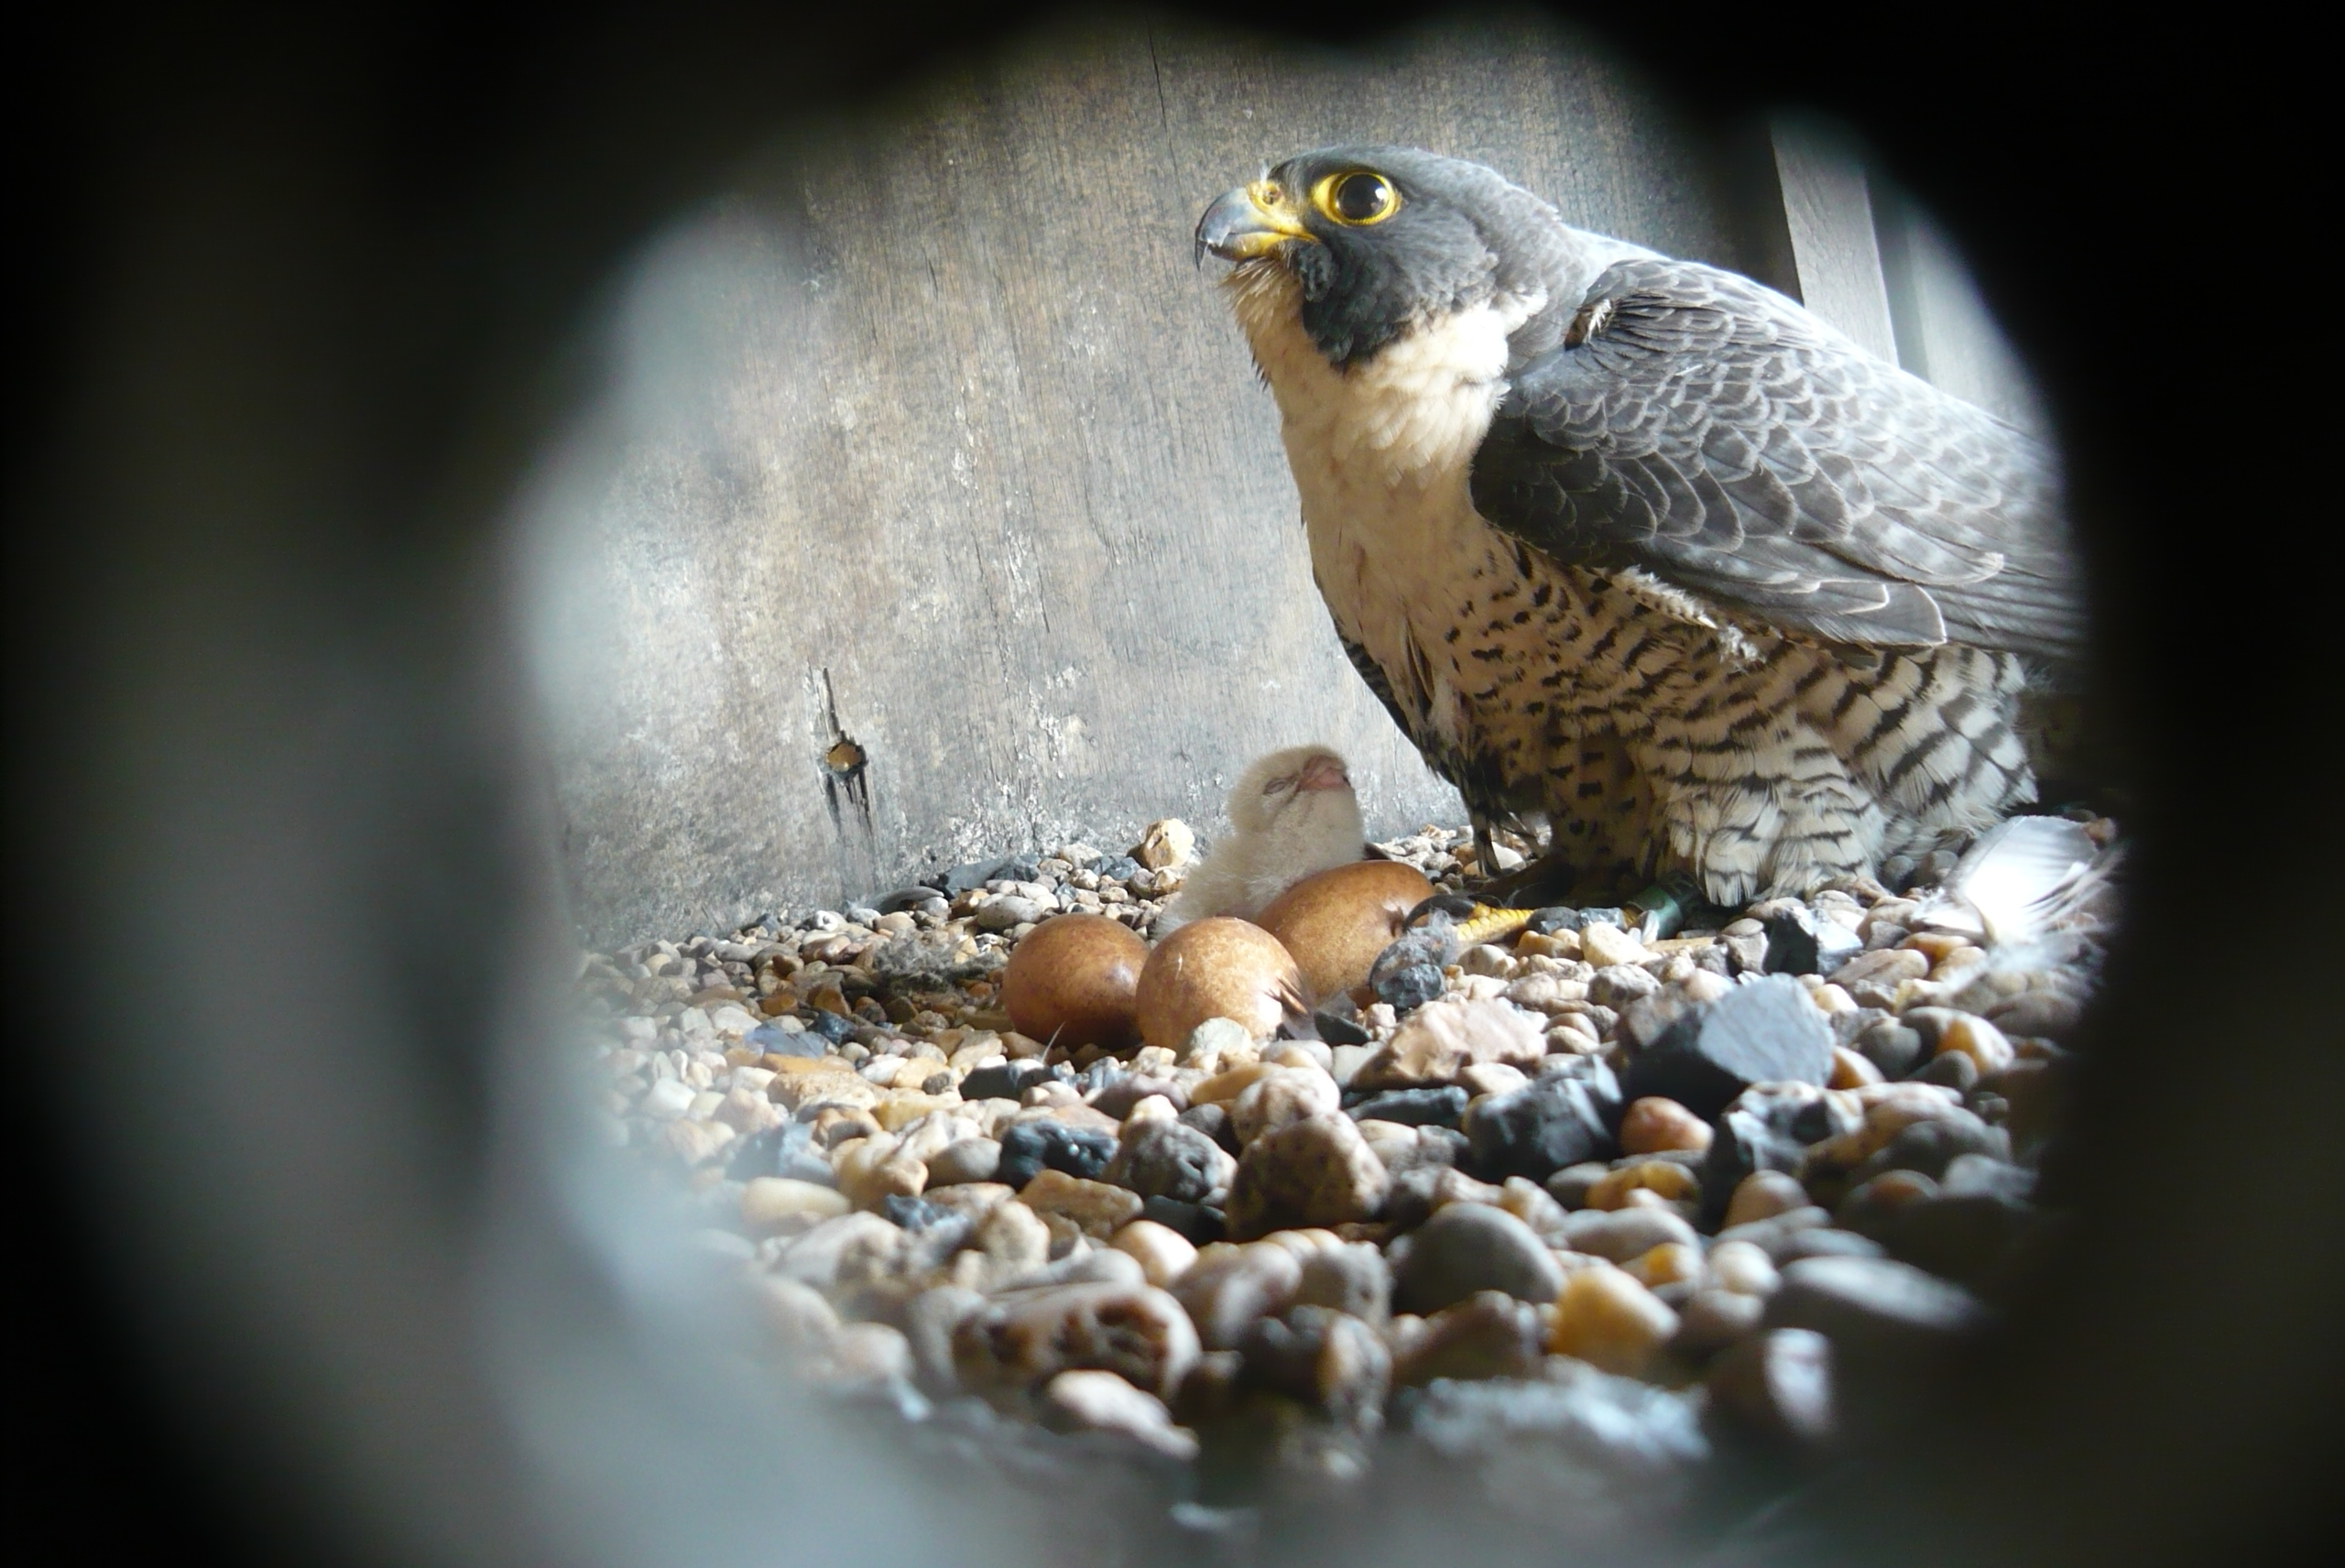 Adult falcons have a distinctive “hood” on their head, a gray back and a white throat.